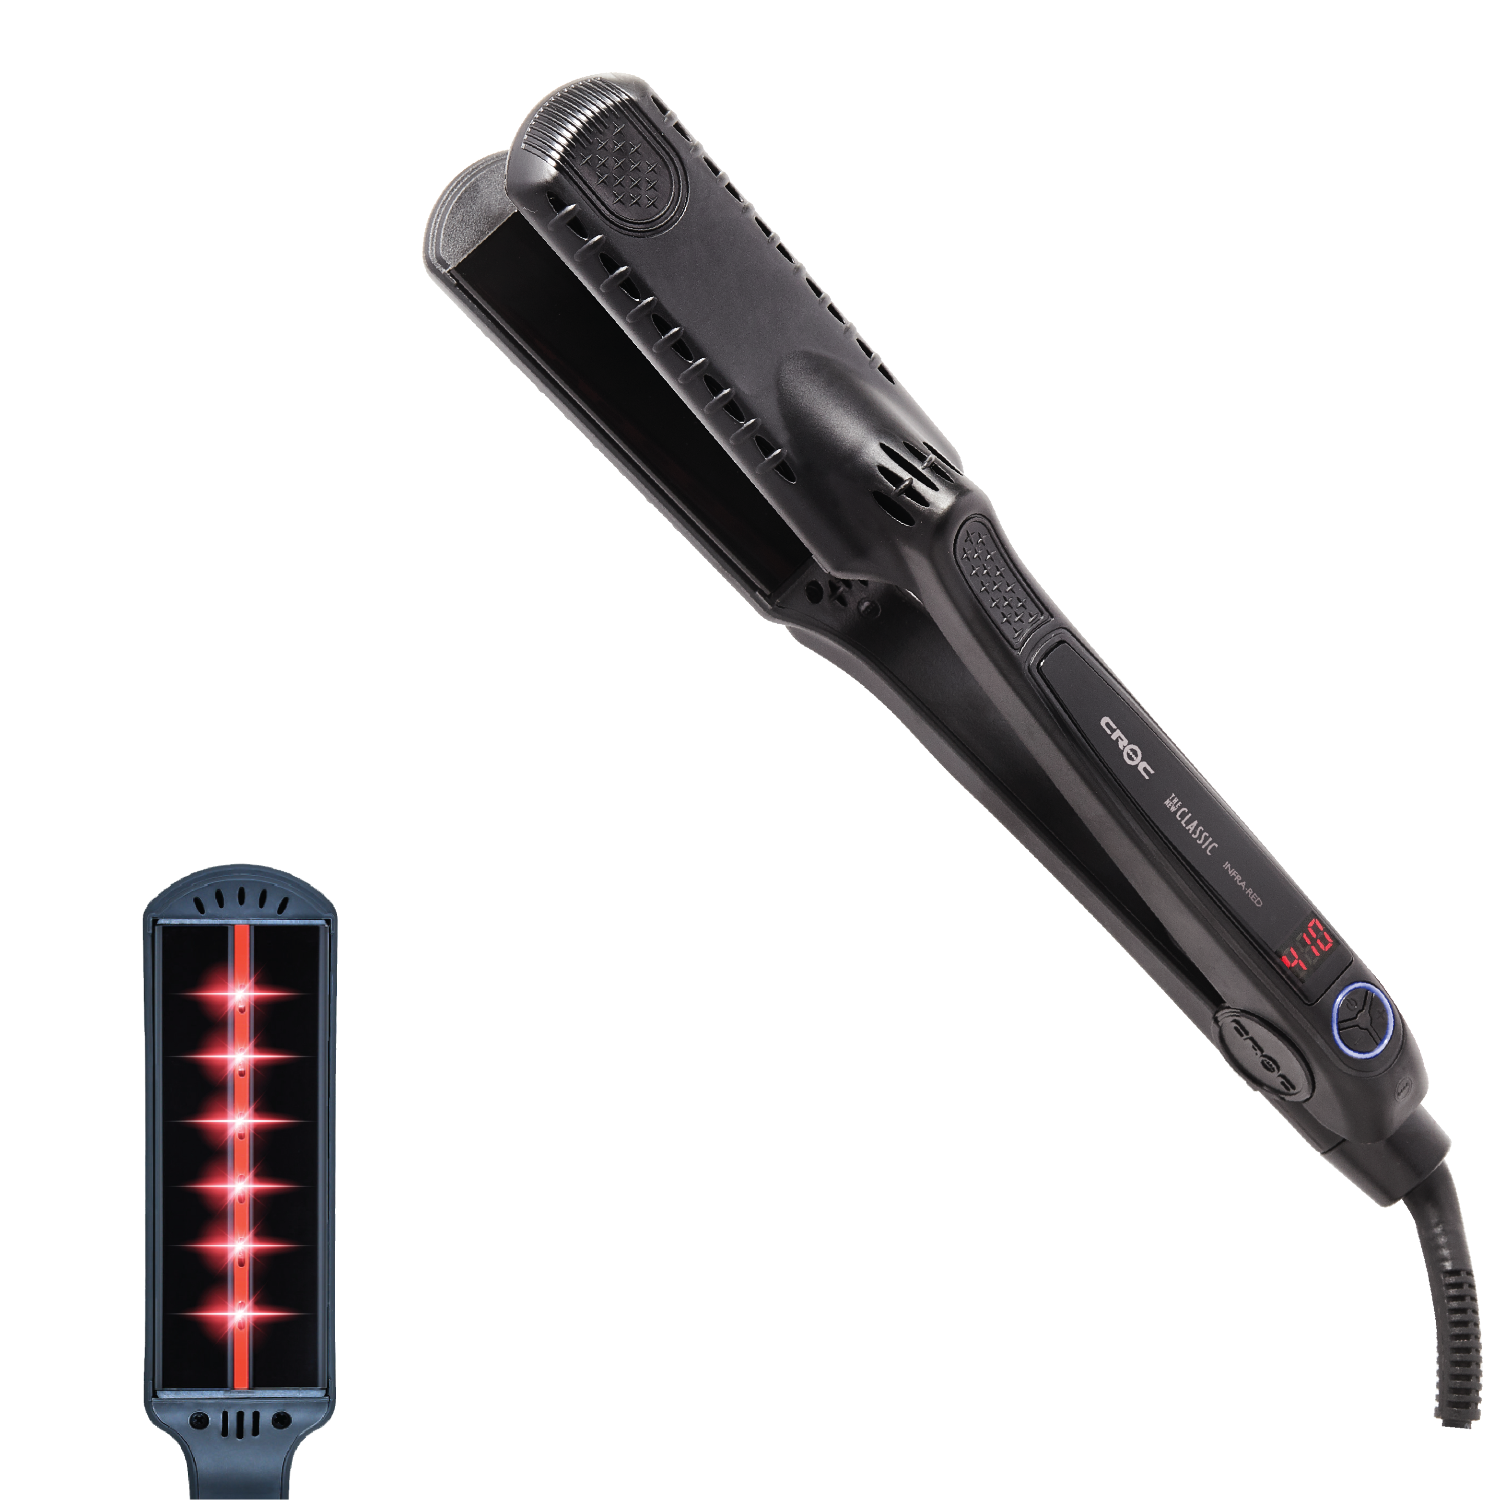 CROC The New Classic Infrared Flat Iron